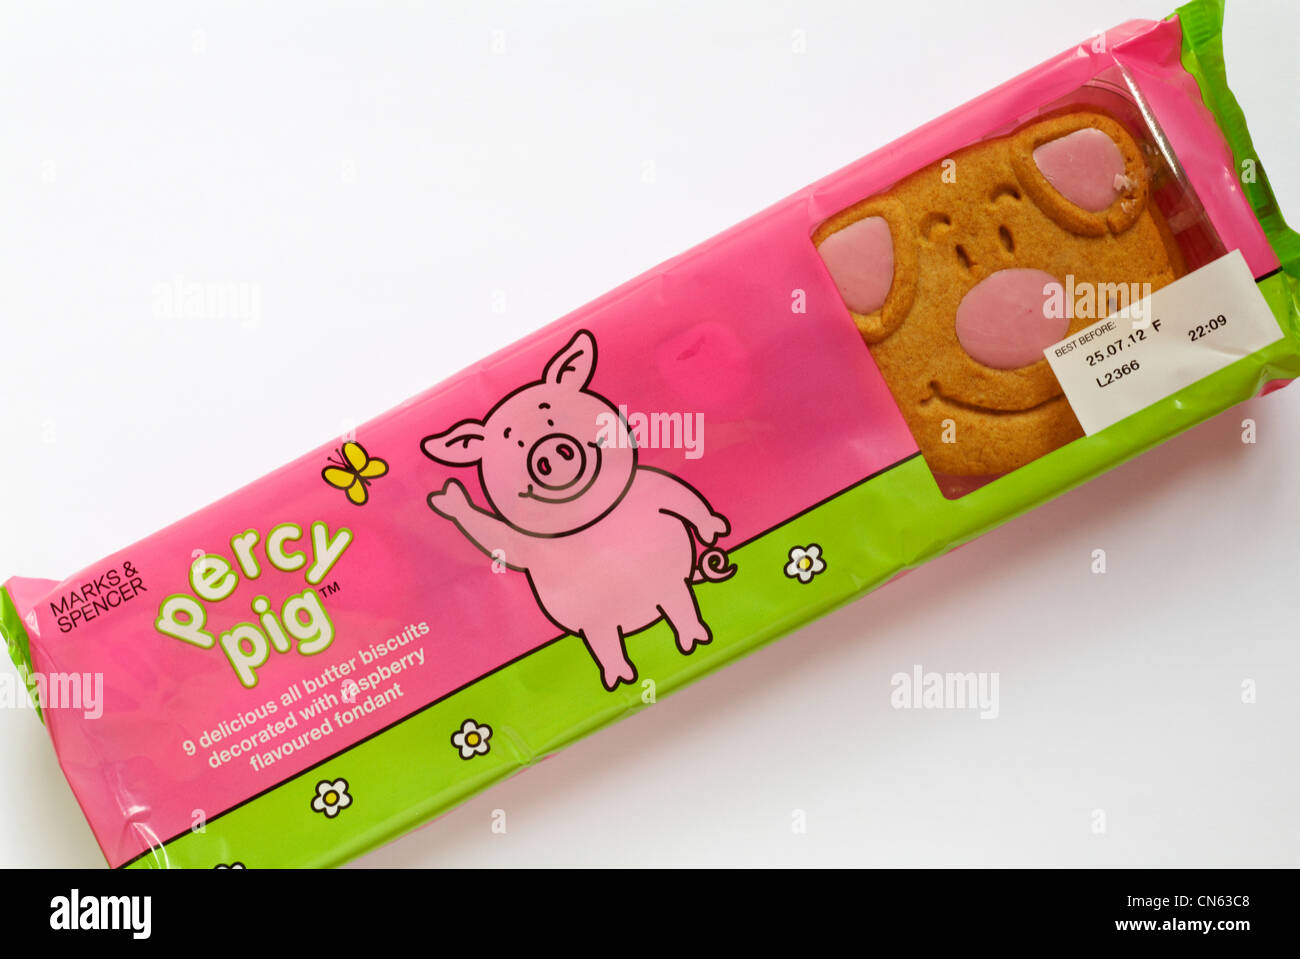 packet of Marks & Spencer percy pig biscuits set on white background Stock Photo